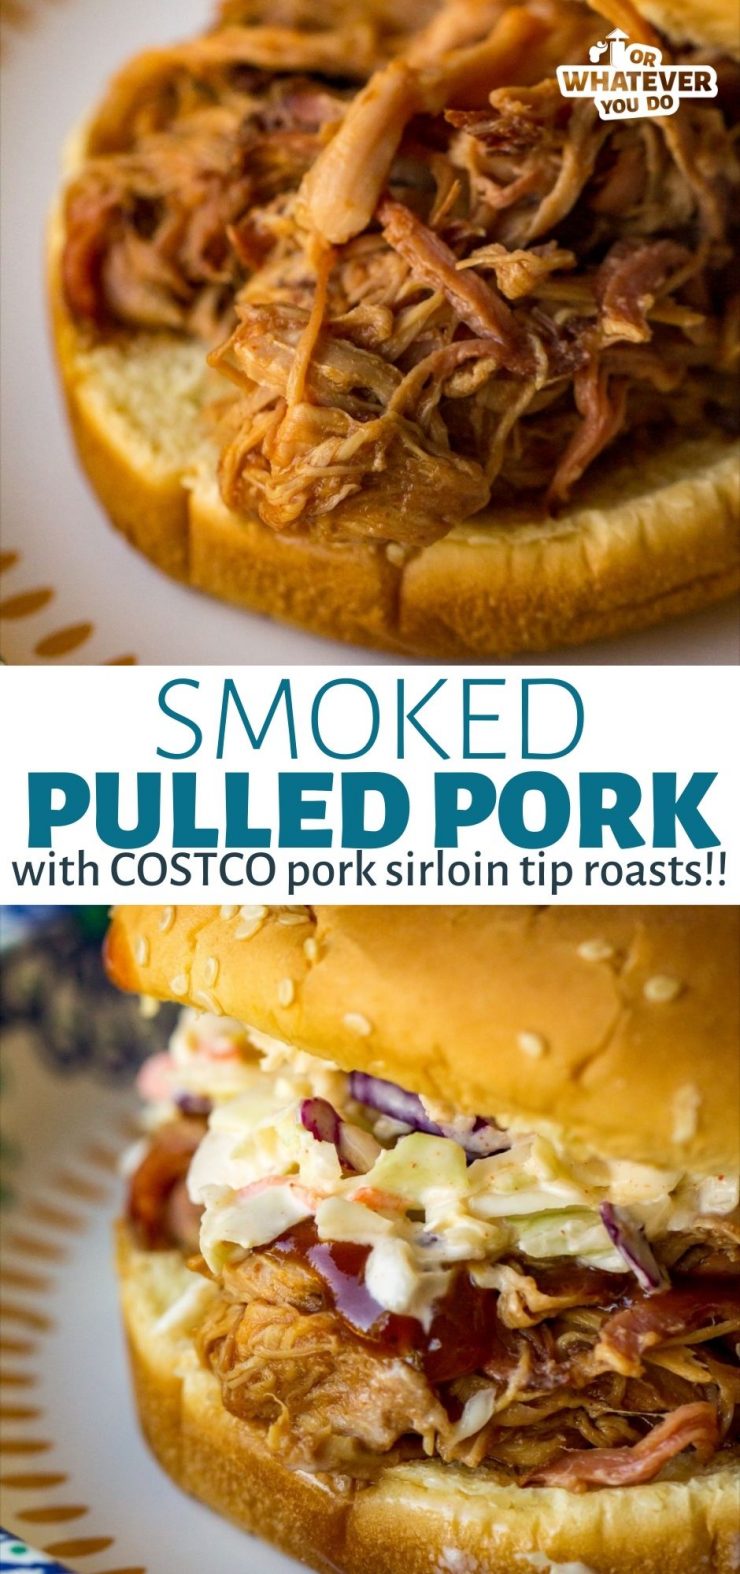 Smoked Pulled Pork with Costco Pork Sirloin Tip Roasts